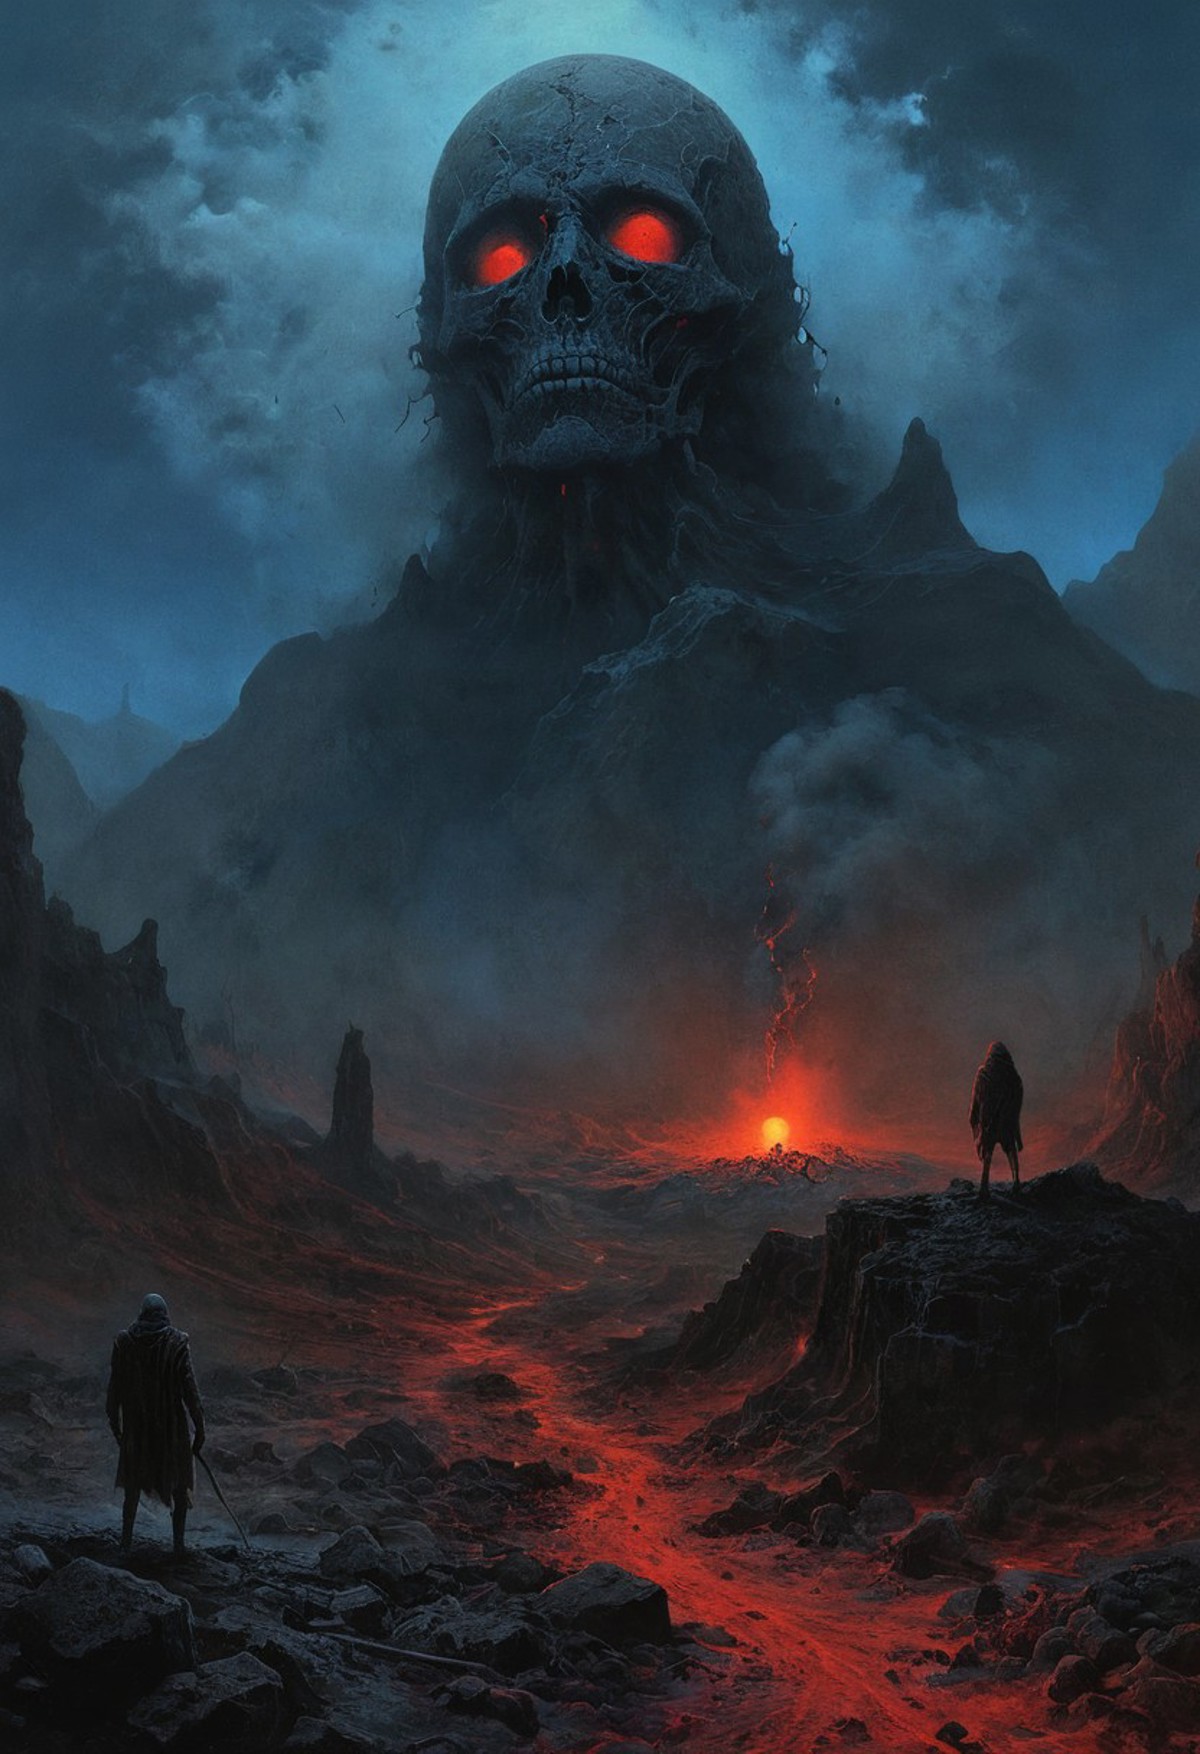 A dark, atmospheric landscape with a large skull with glowing eyes looming over jagged mountains and molten lava flows. Three figures stand in the foreground, looking up at the towering presence. 